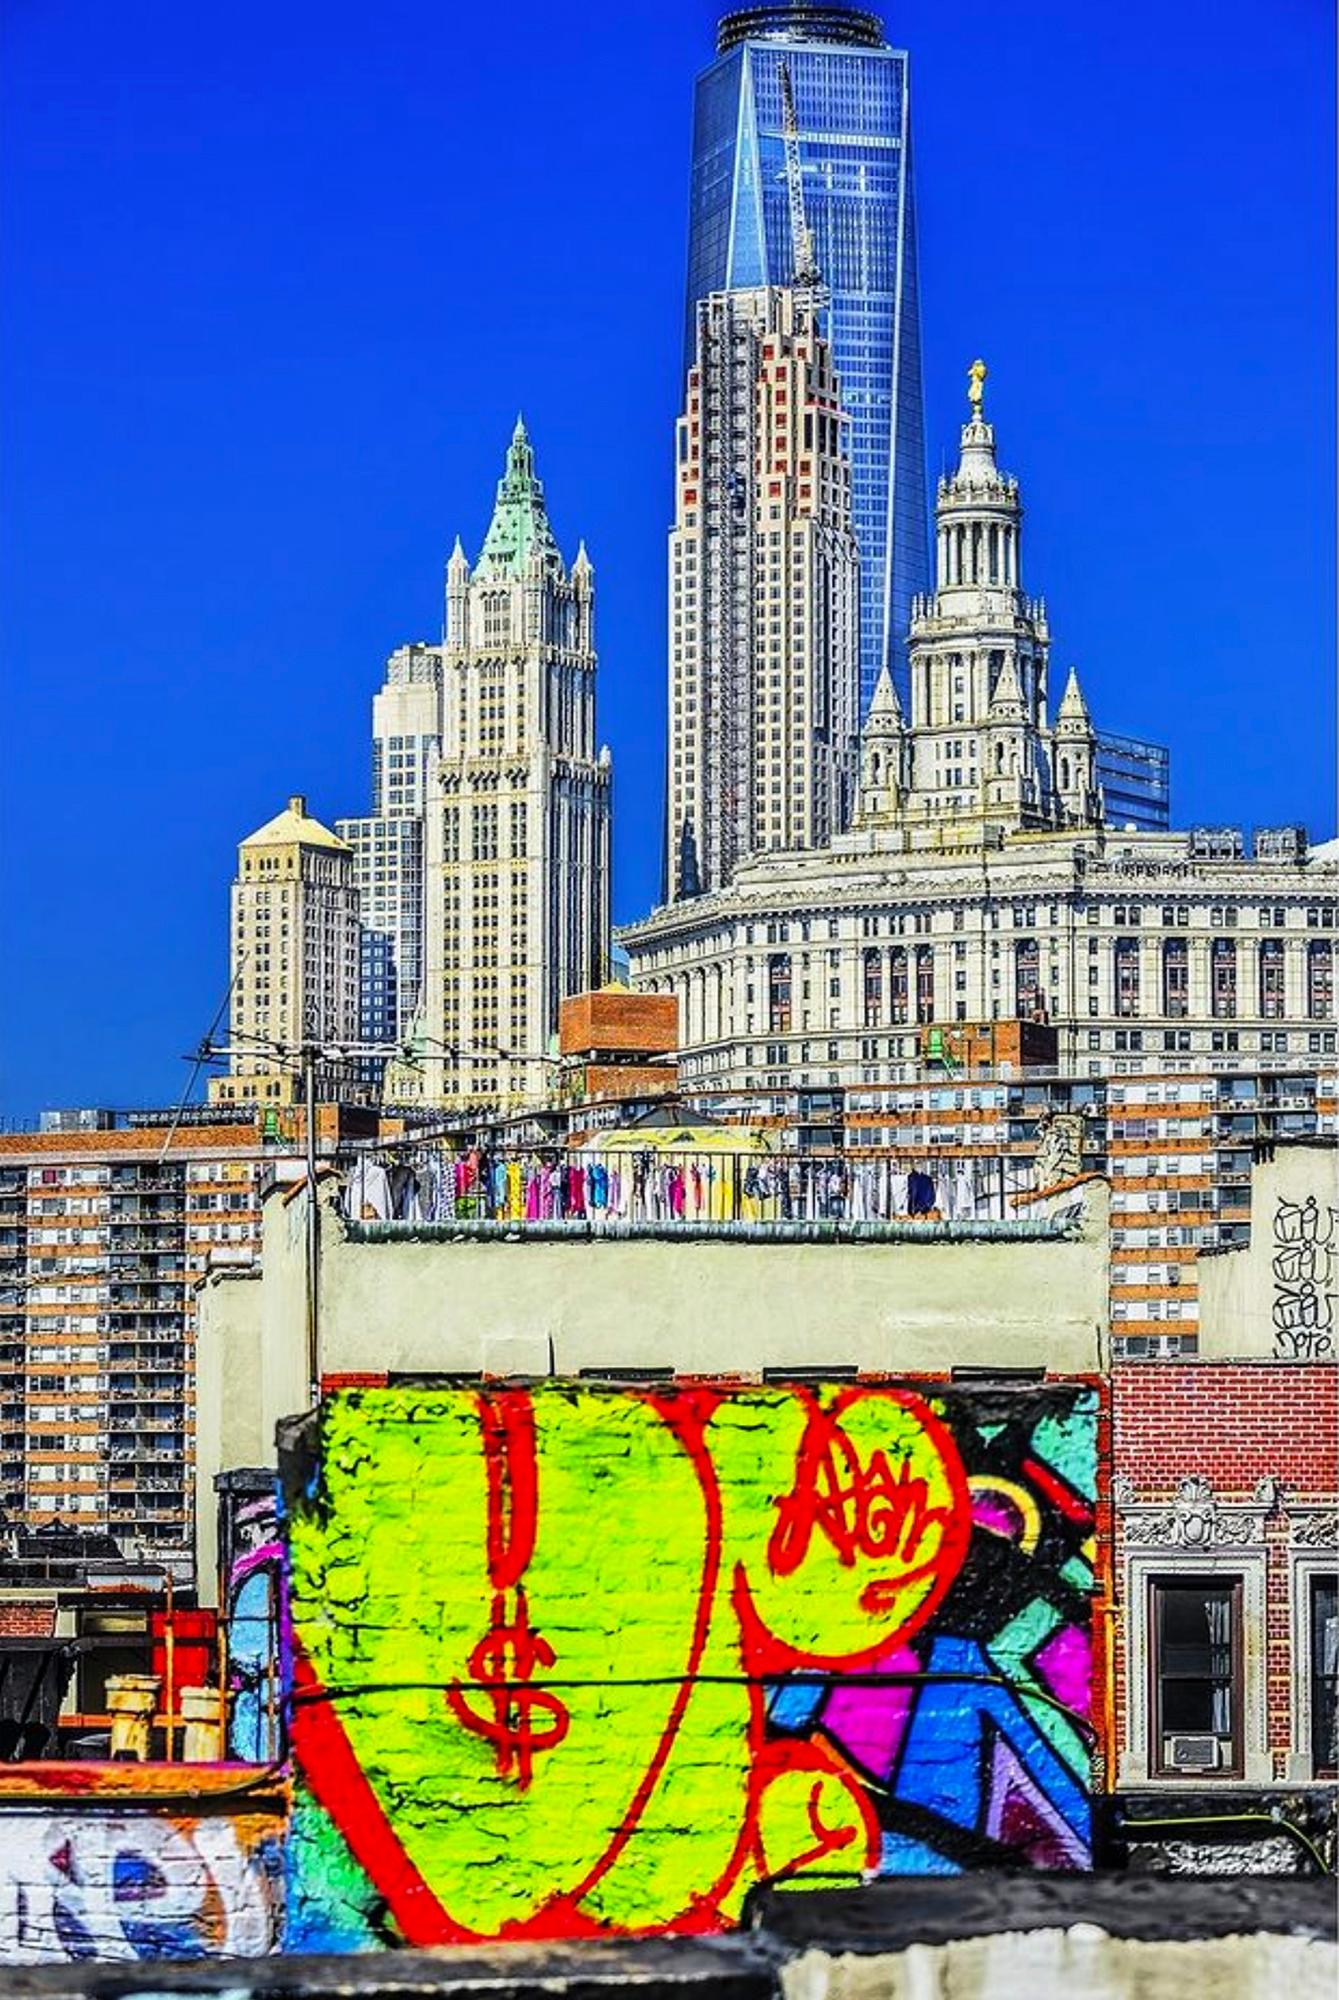 Mitchell Funk Landscape Photograph - Downtown Manhattan Skyline with Graffiti Wall,   Architectural Photography 